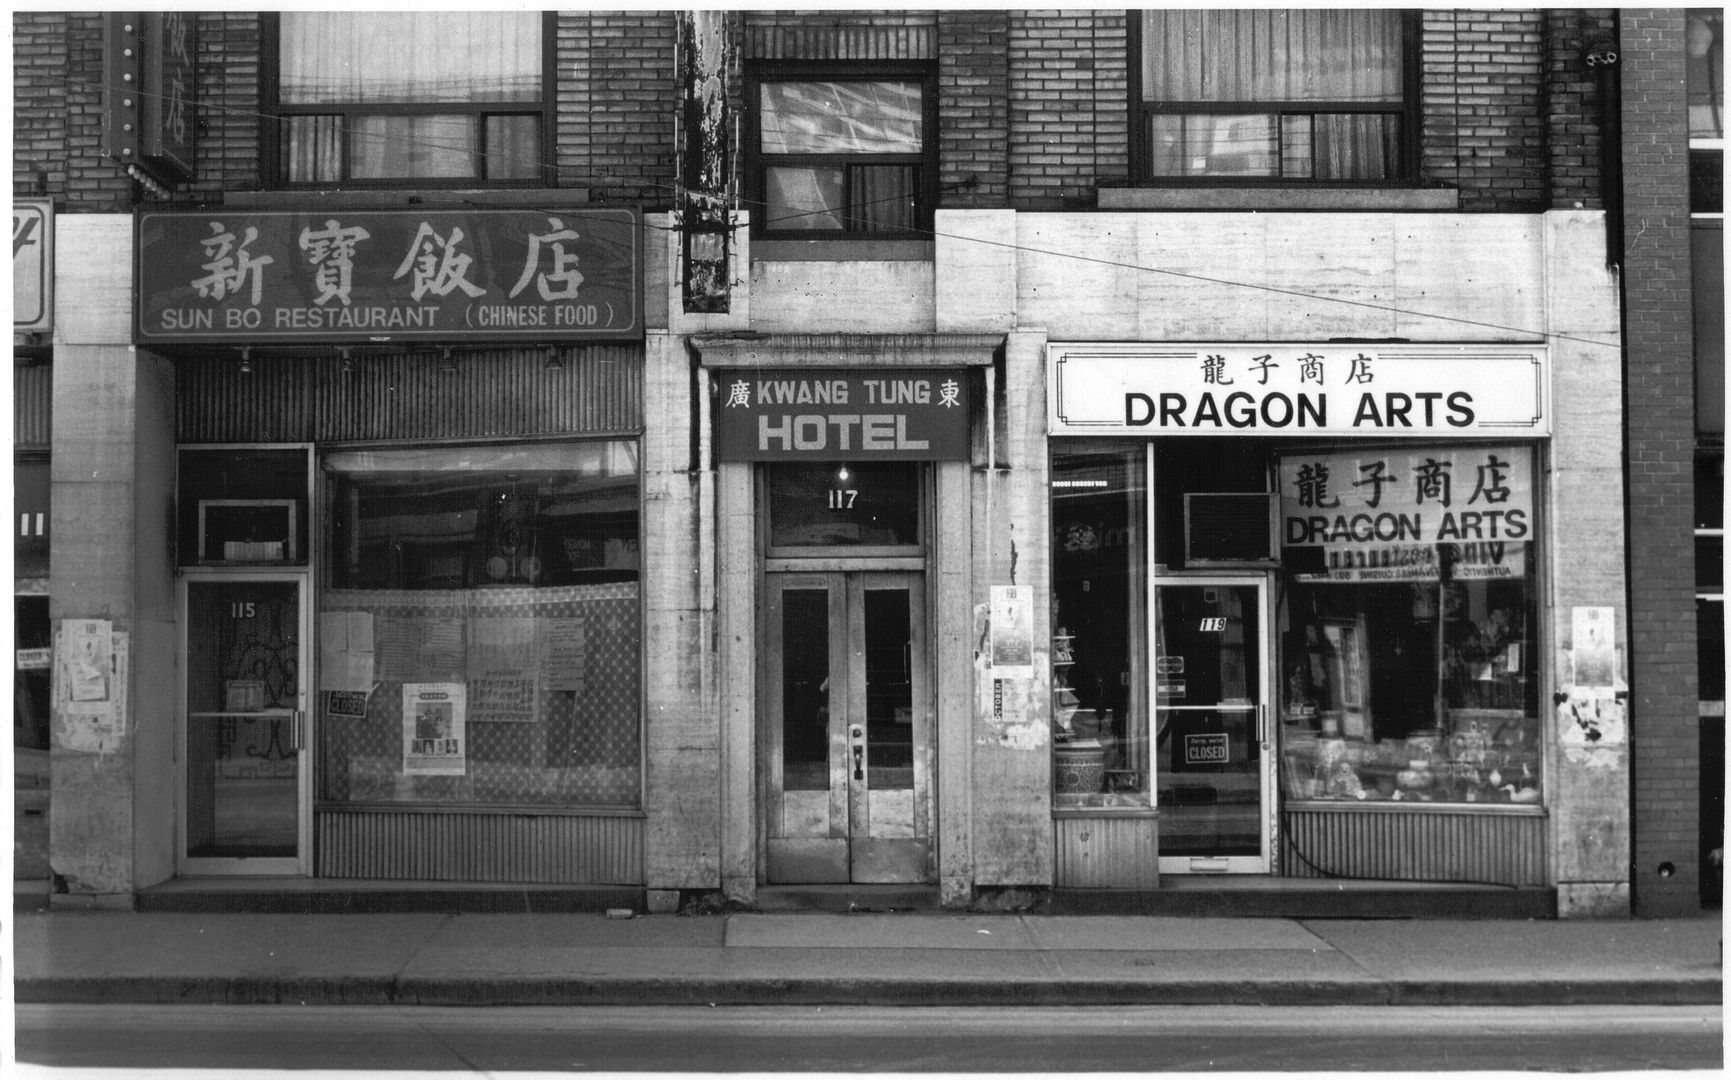 Chinese-Storefronts-on-Dundas-Street-East-MHSO-Collection-CHI-86050_zpsvgpoconf.jpg